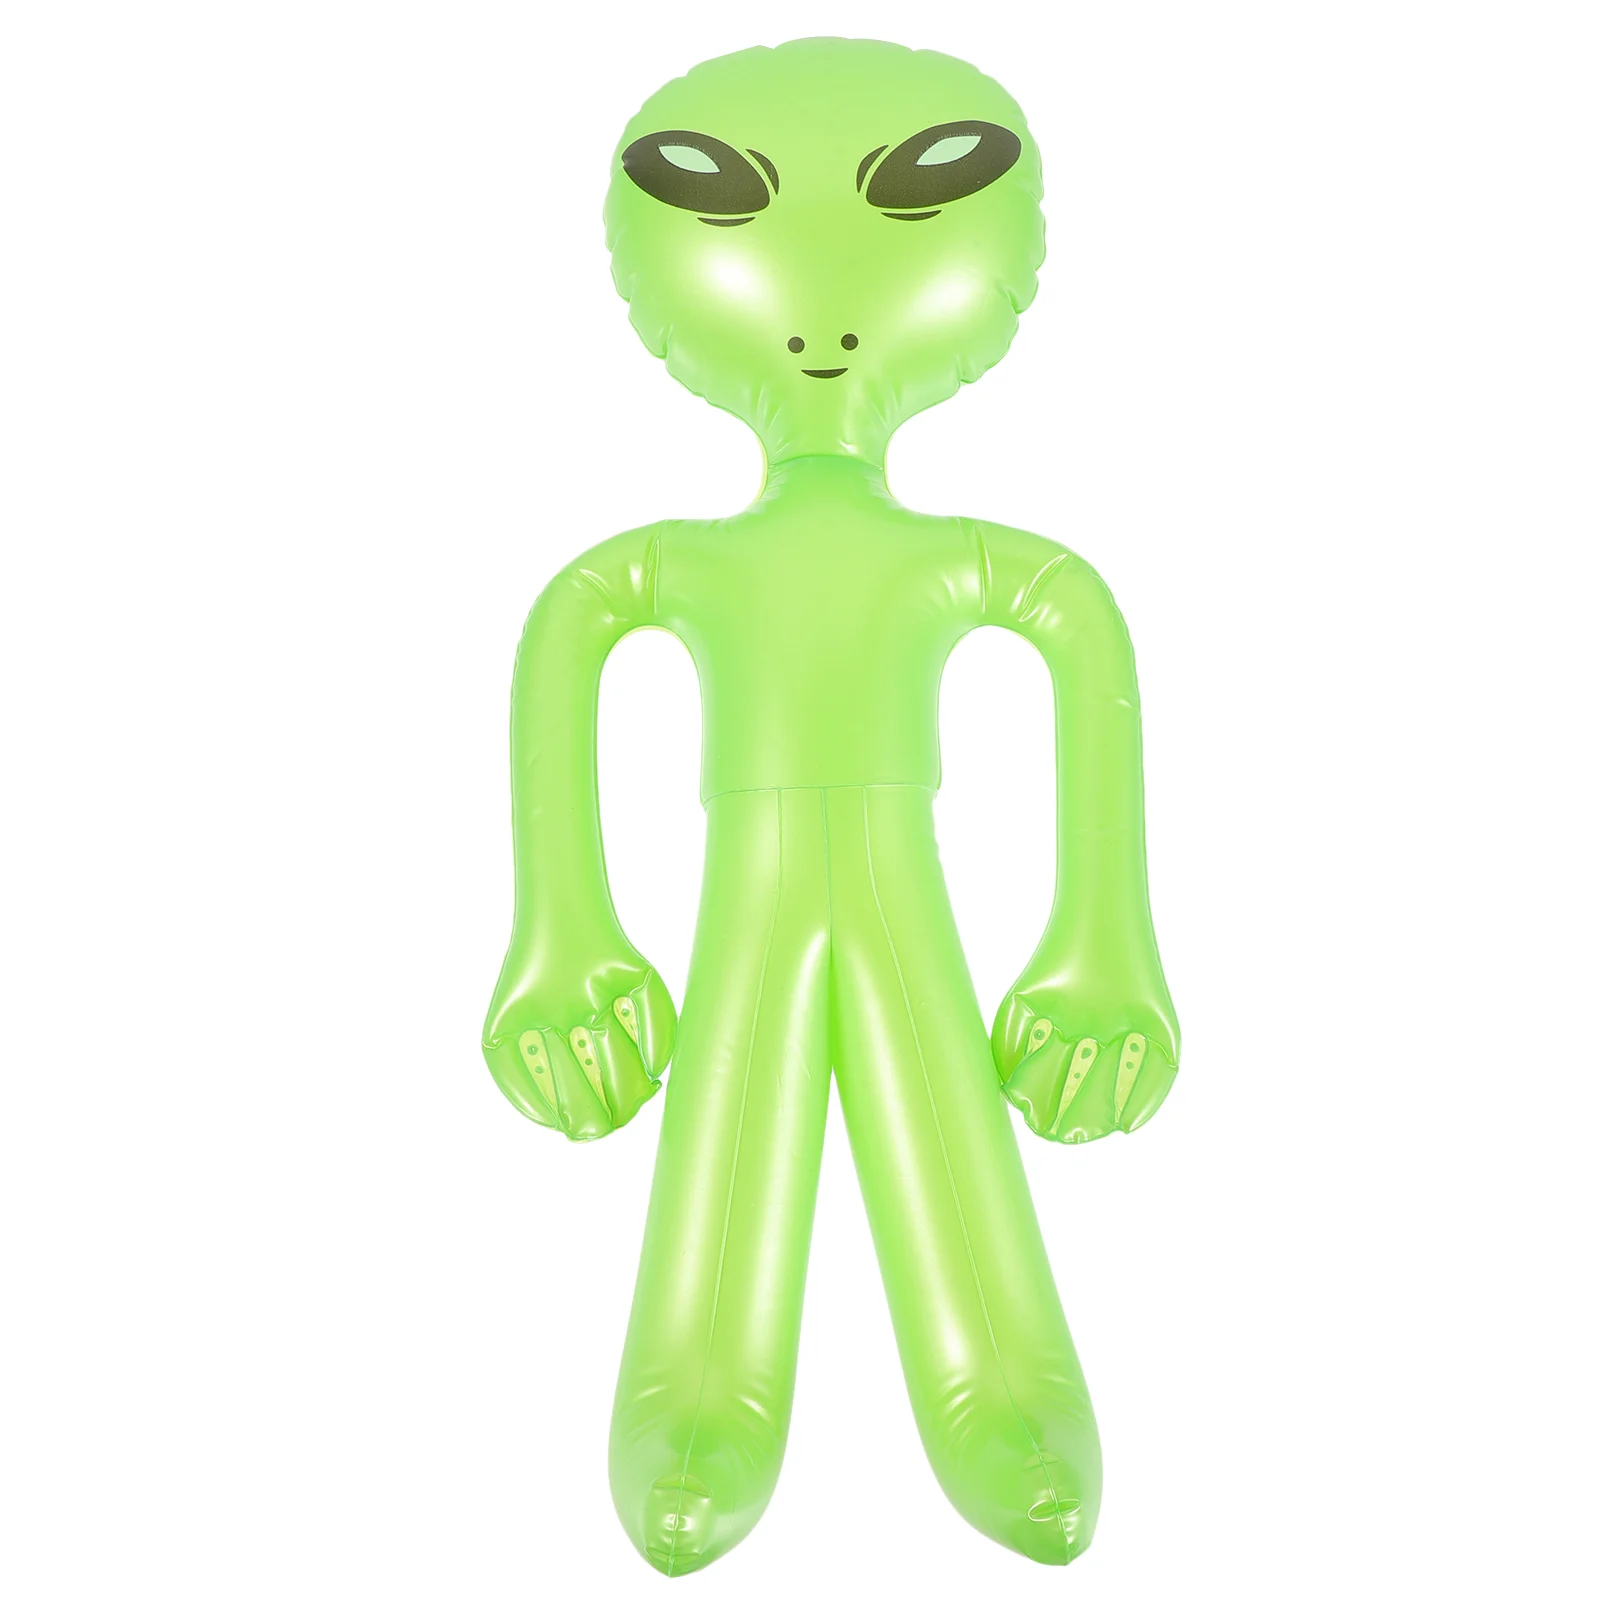 

Giant Inflatable Alien Novelty Blowing up Alien Doll Prop Theme Christmas Birthday Party Novelty Treasures Outer Space Party